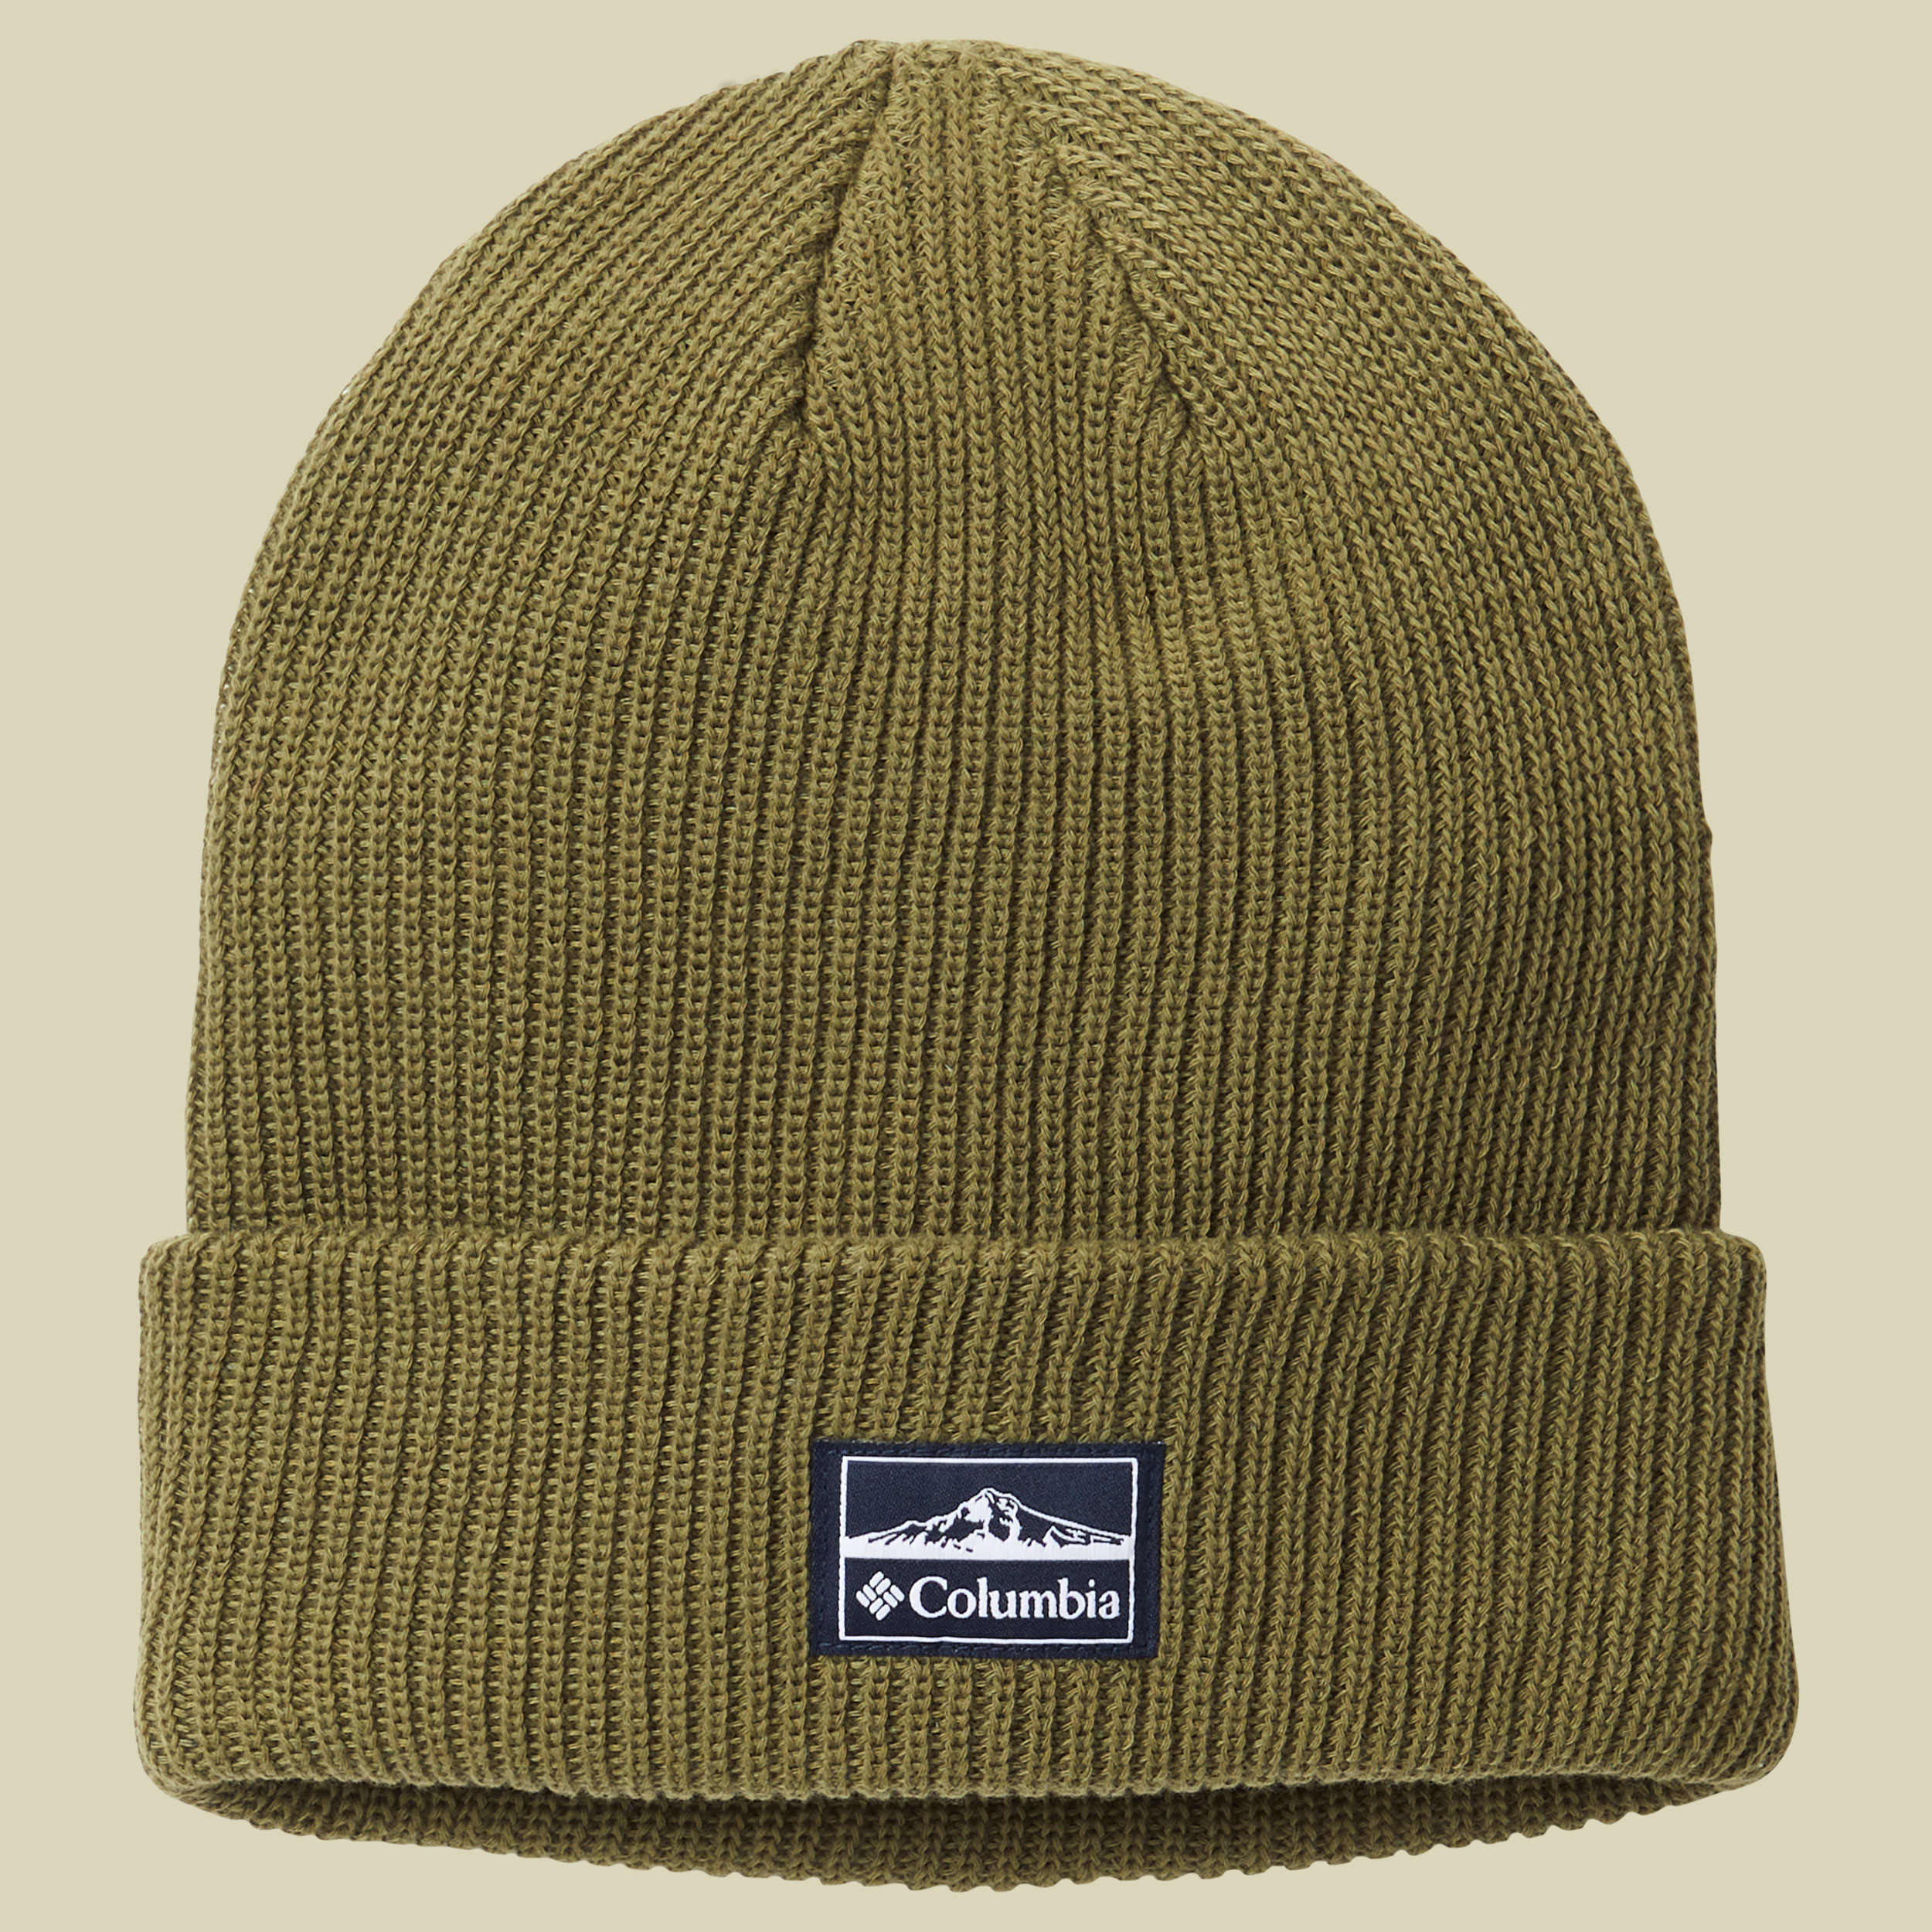 Lost Lager II Beanie Größe one size Farbe stone green